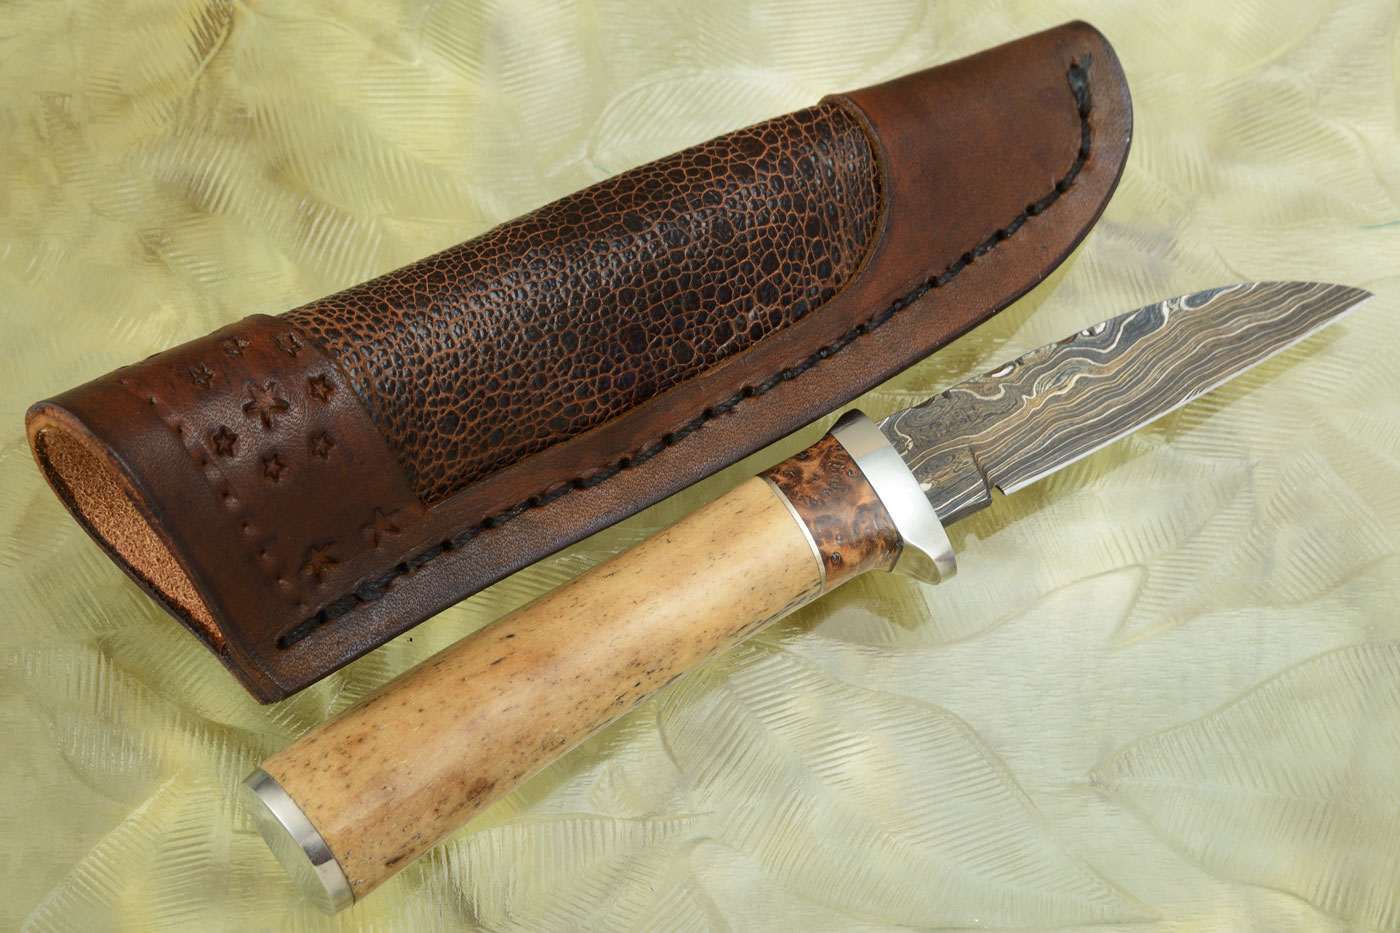 Damascus Wharncliffe with Oosic and Maple Burl